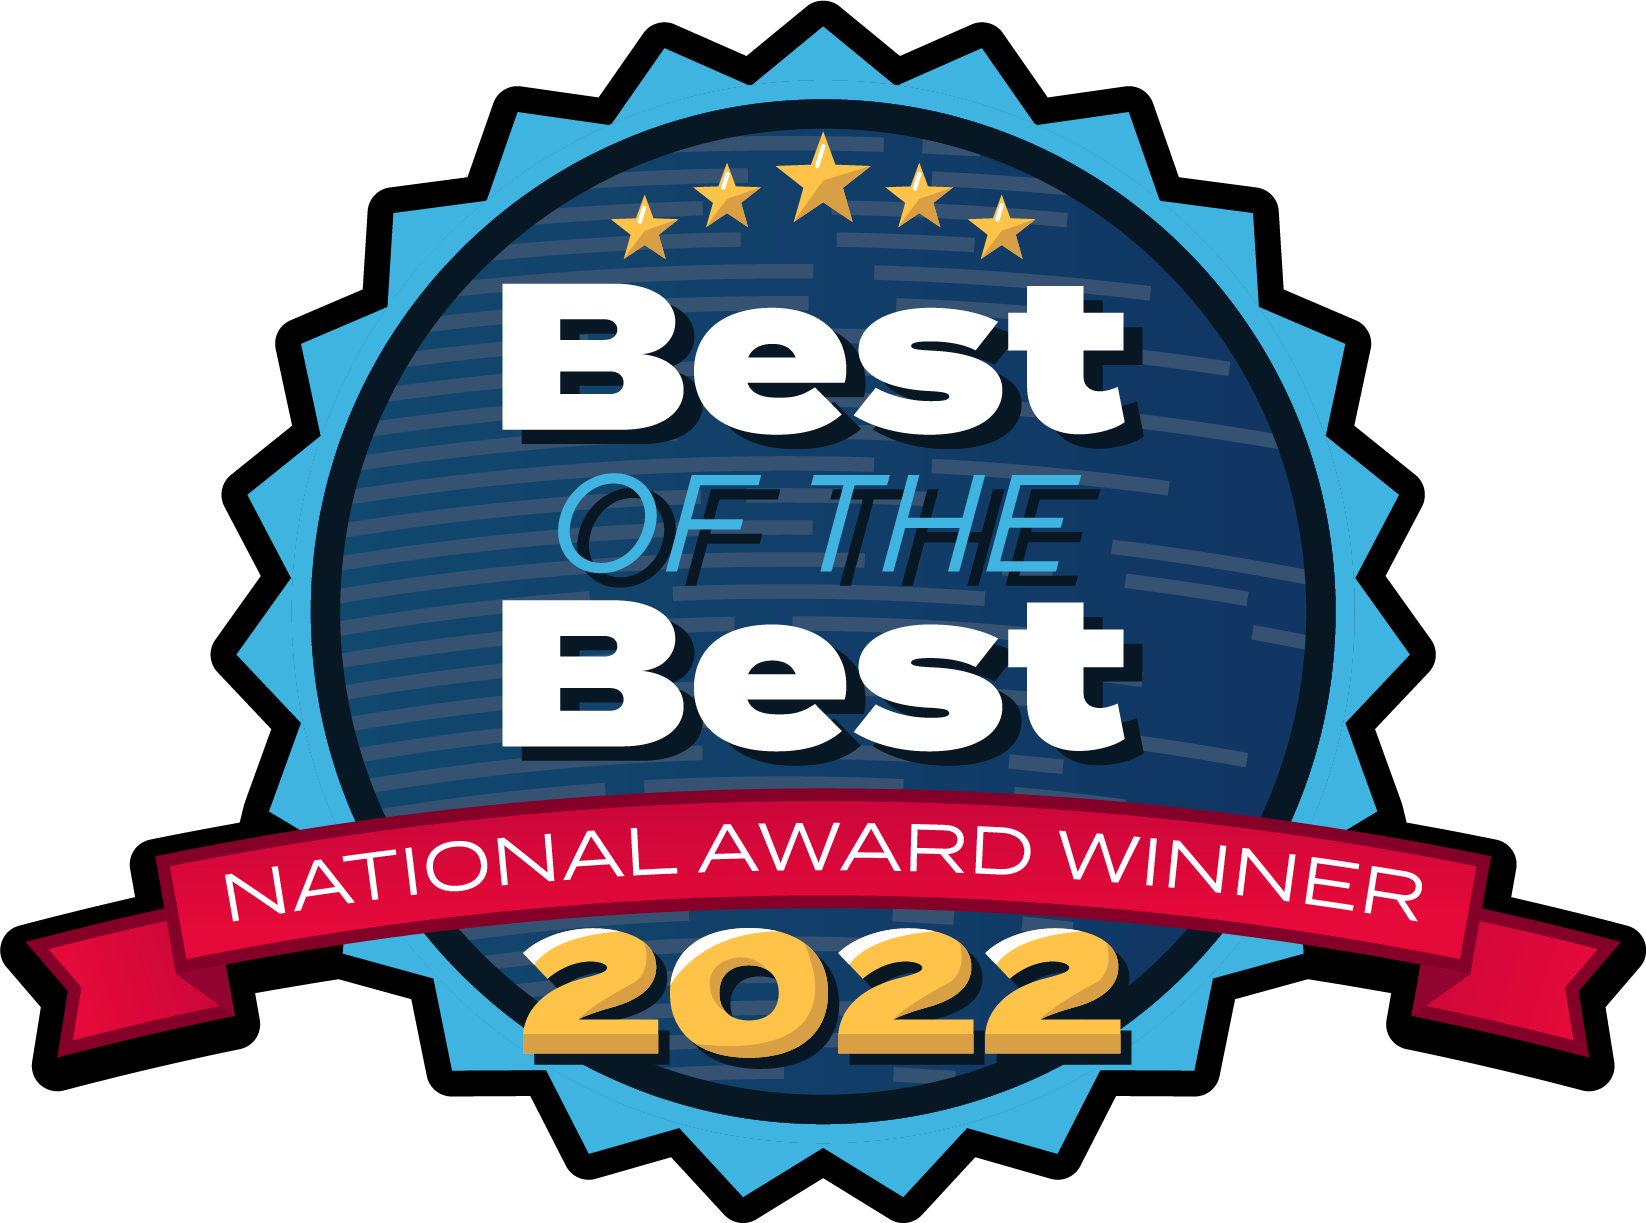 Best of the Best Awards 2022